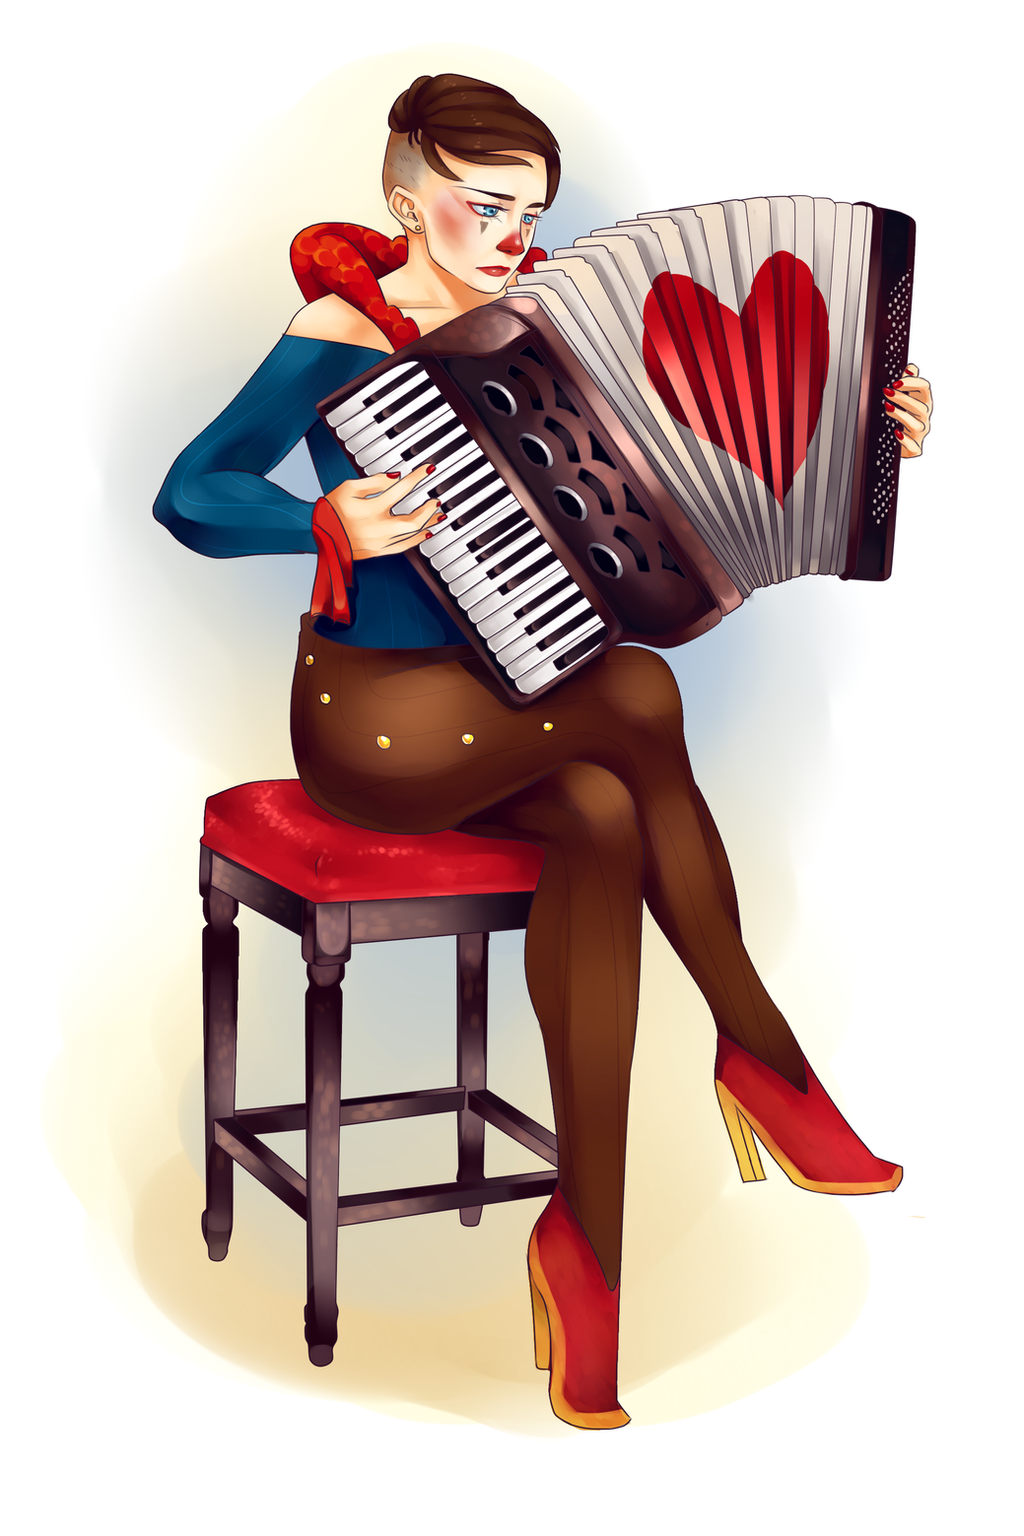 im_sad_i_cant_play_the_accordion_elvis_poster_png_by_pariahi-d7wvxiw.png